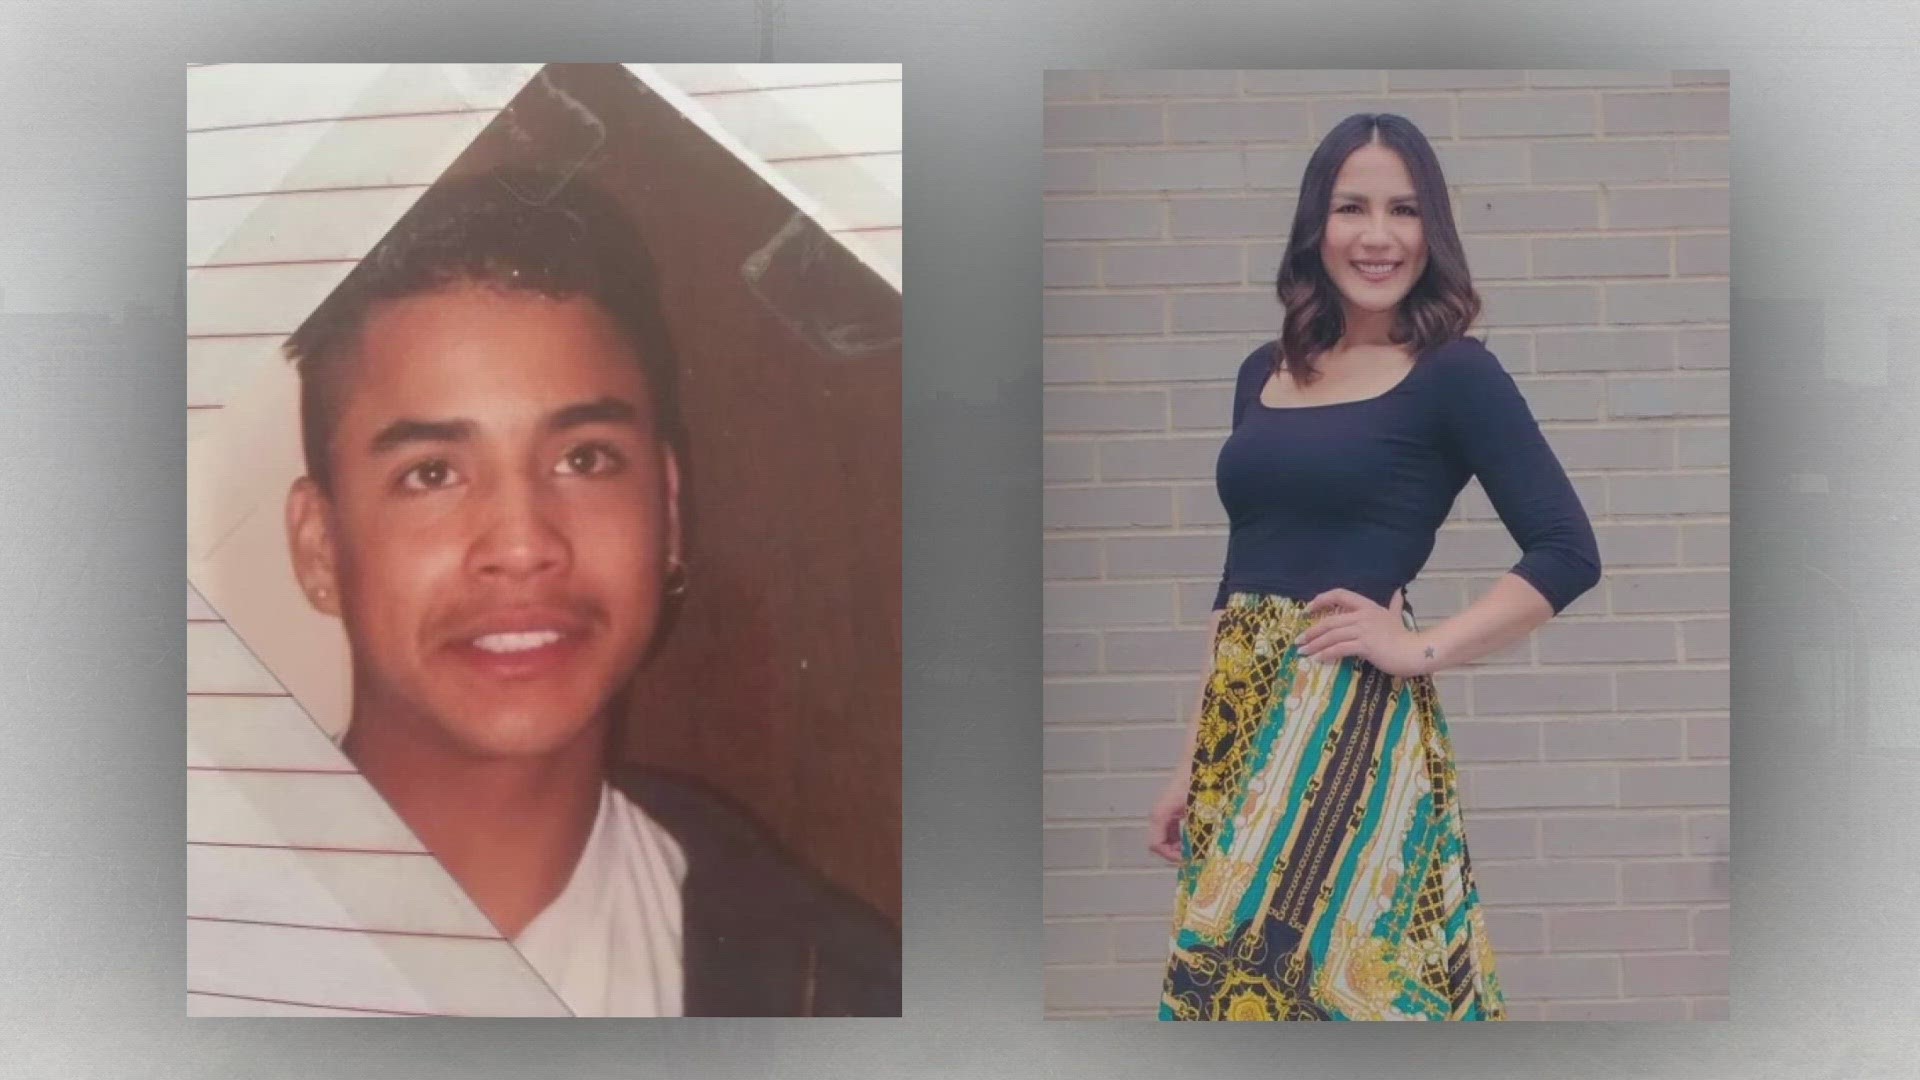 “We have lost two beautiful, beautiful loved ones in the same city in the span of three decades,” Pamela Cabriales' brother Alex Cabriales said.